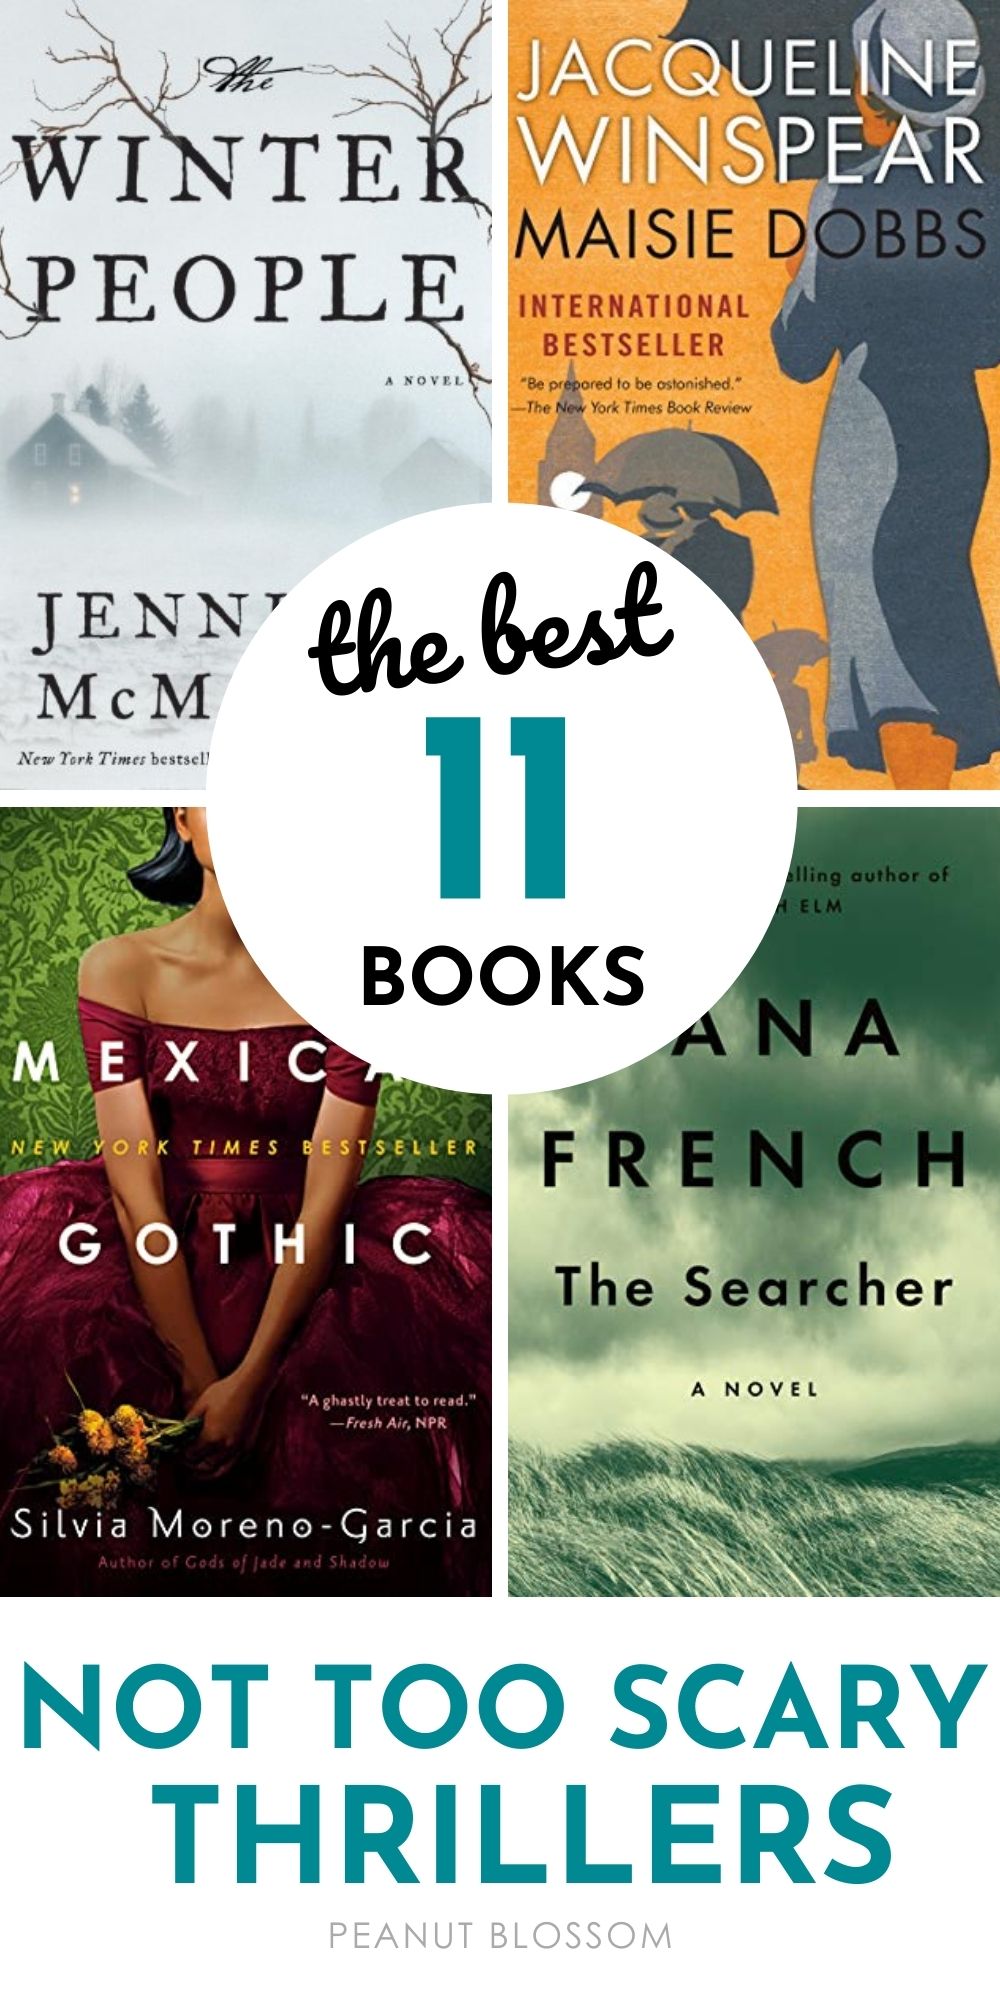 Collage of four book titles The Winter People, Maisie Dobbs, Mexican Gothic, and The Searcher with text The best 11 Books and Not too scary thrillers.